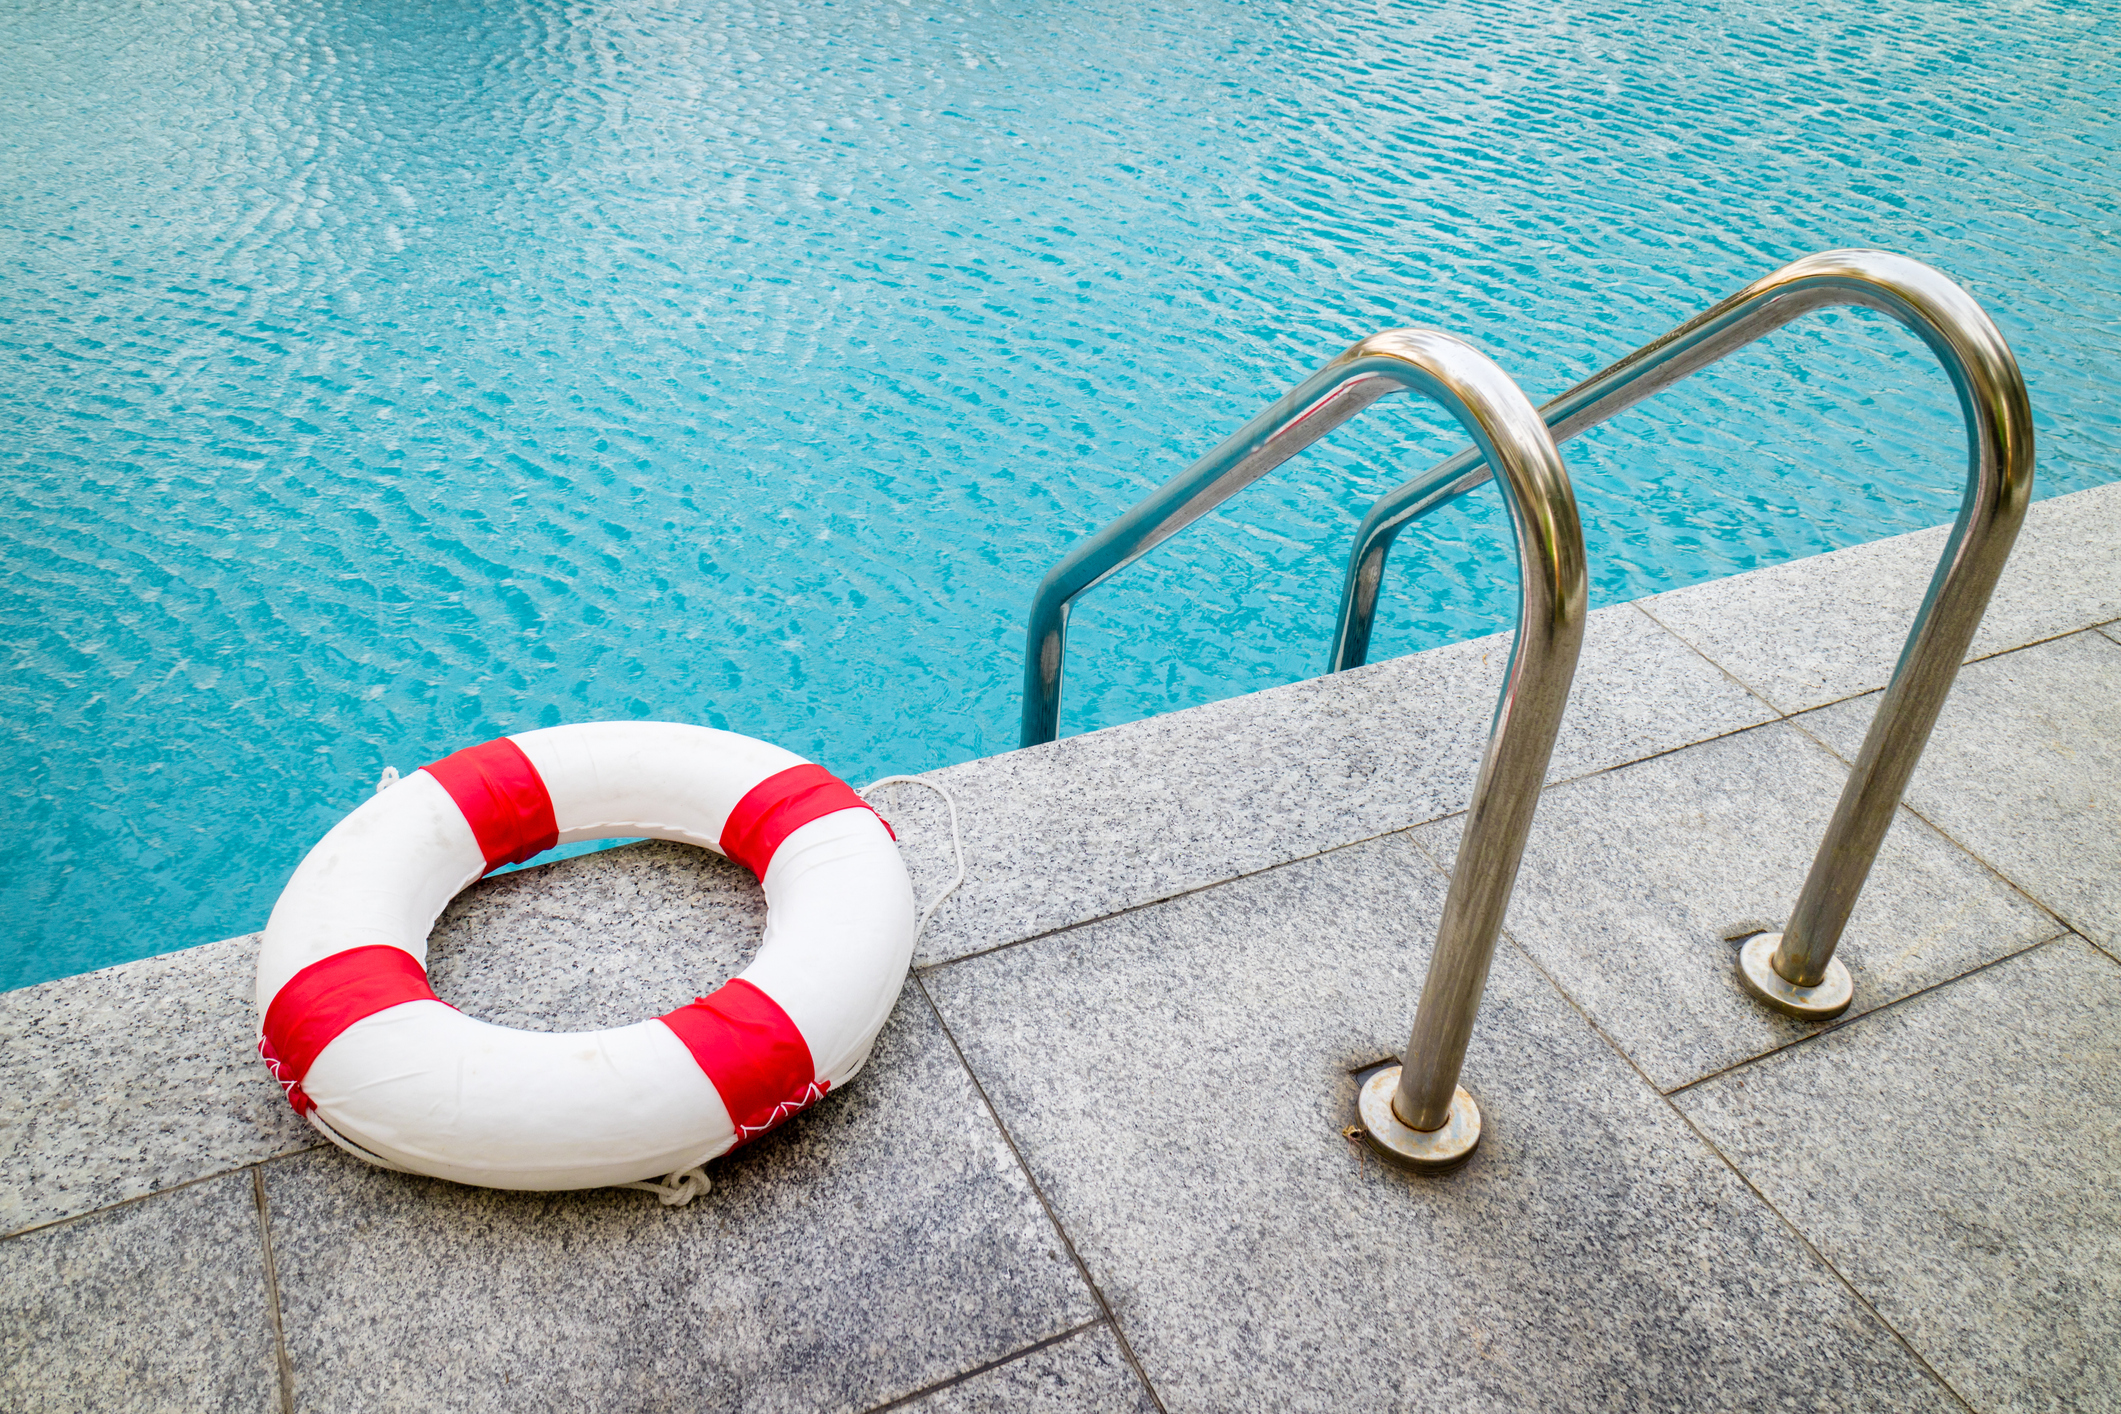 7 Signs a Pool Isn't Safe for Swimming - Swimming Safety Tips